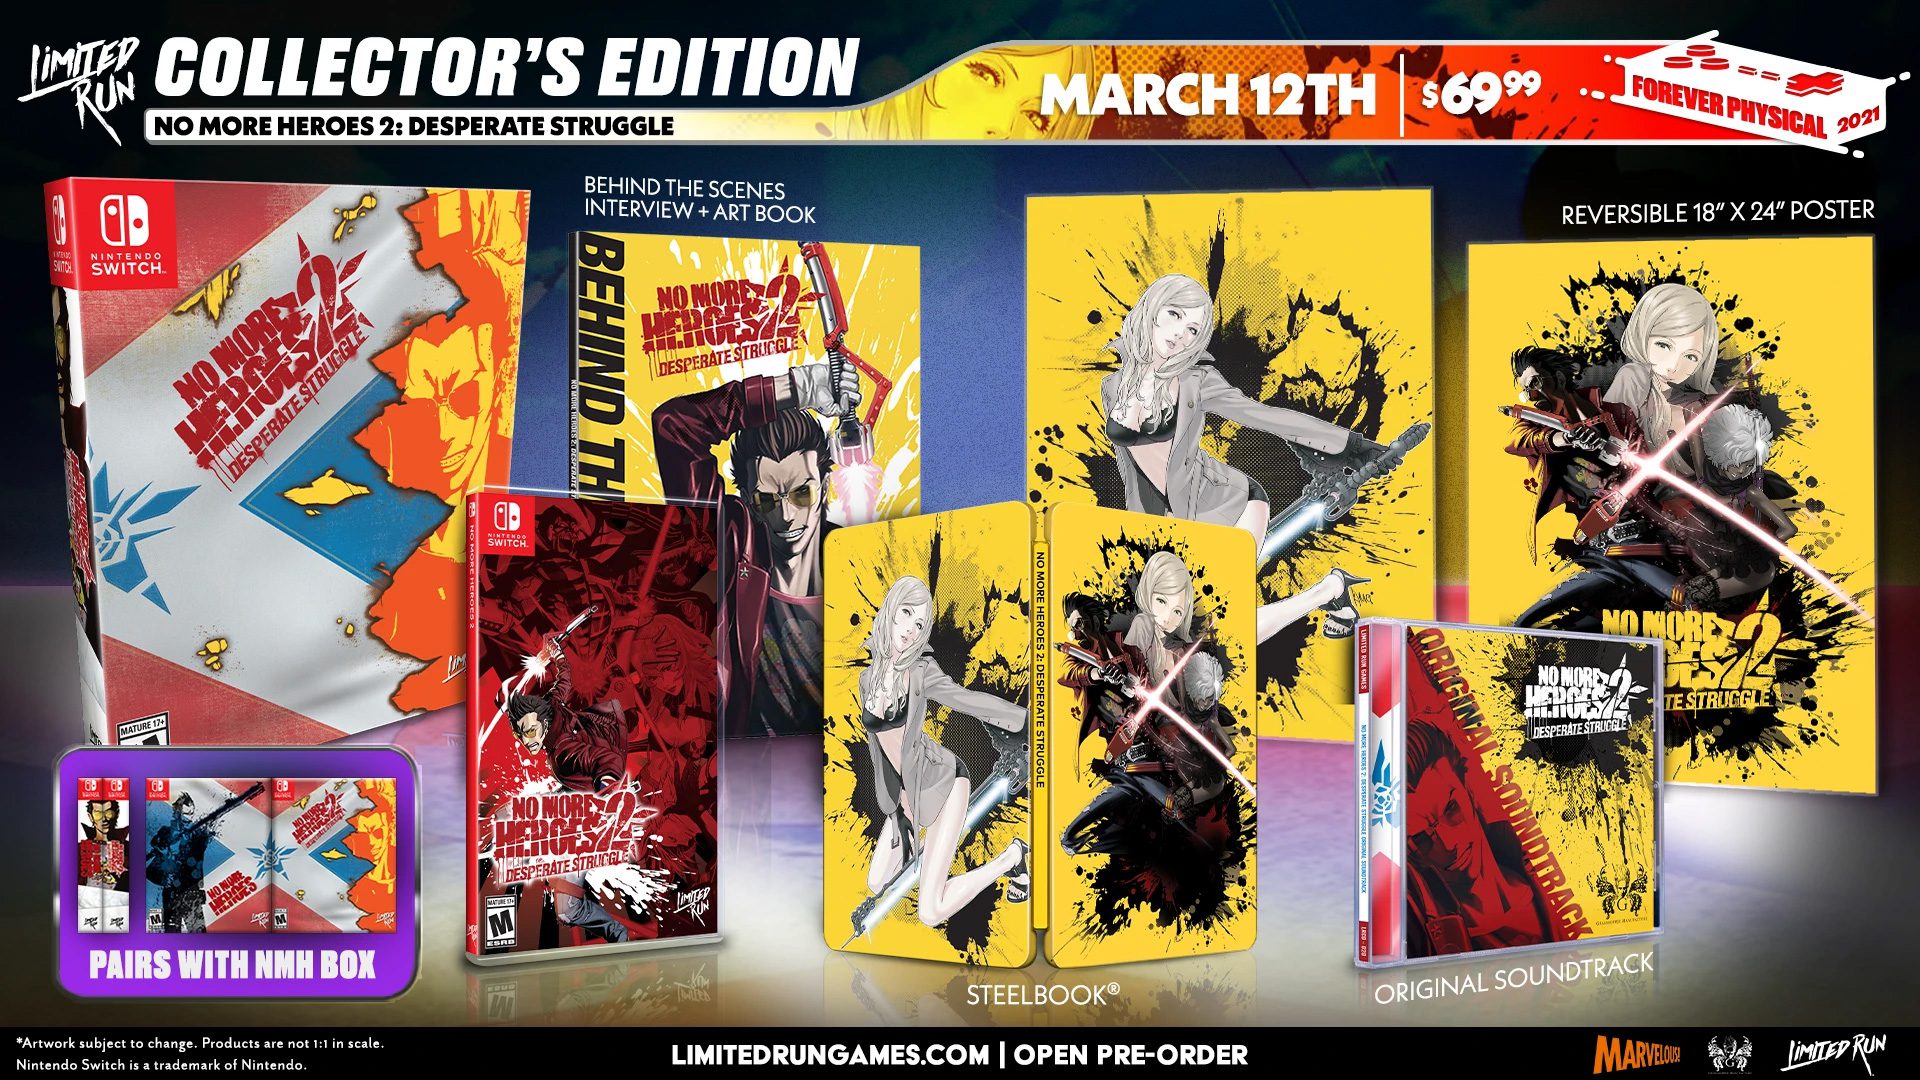 Limited Run's No More Heroes 2 Switch Collector's Edition goes on sale March 12, 2021.